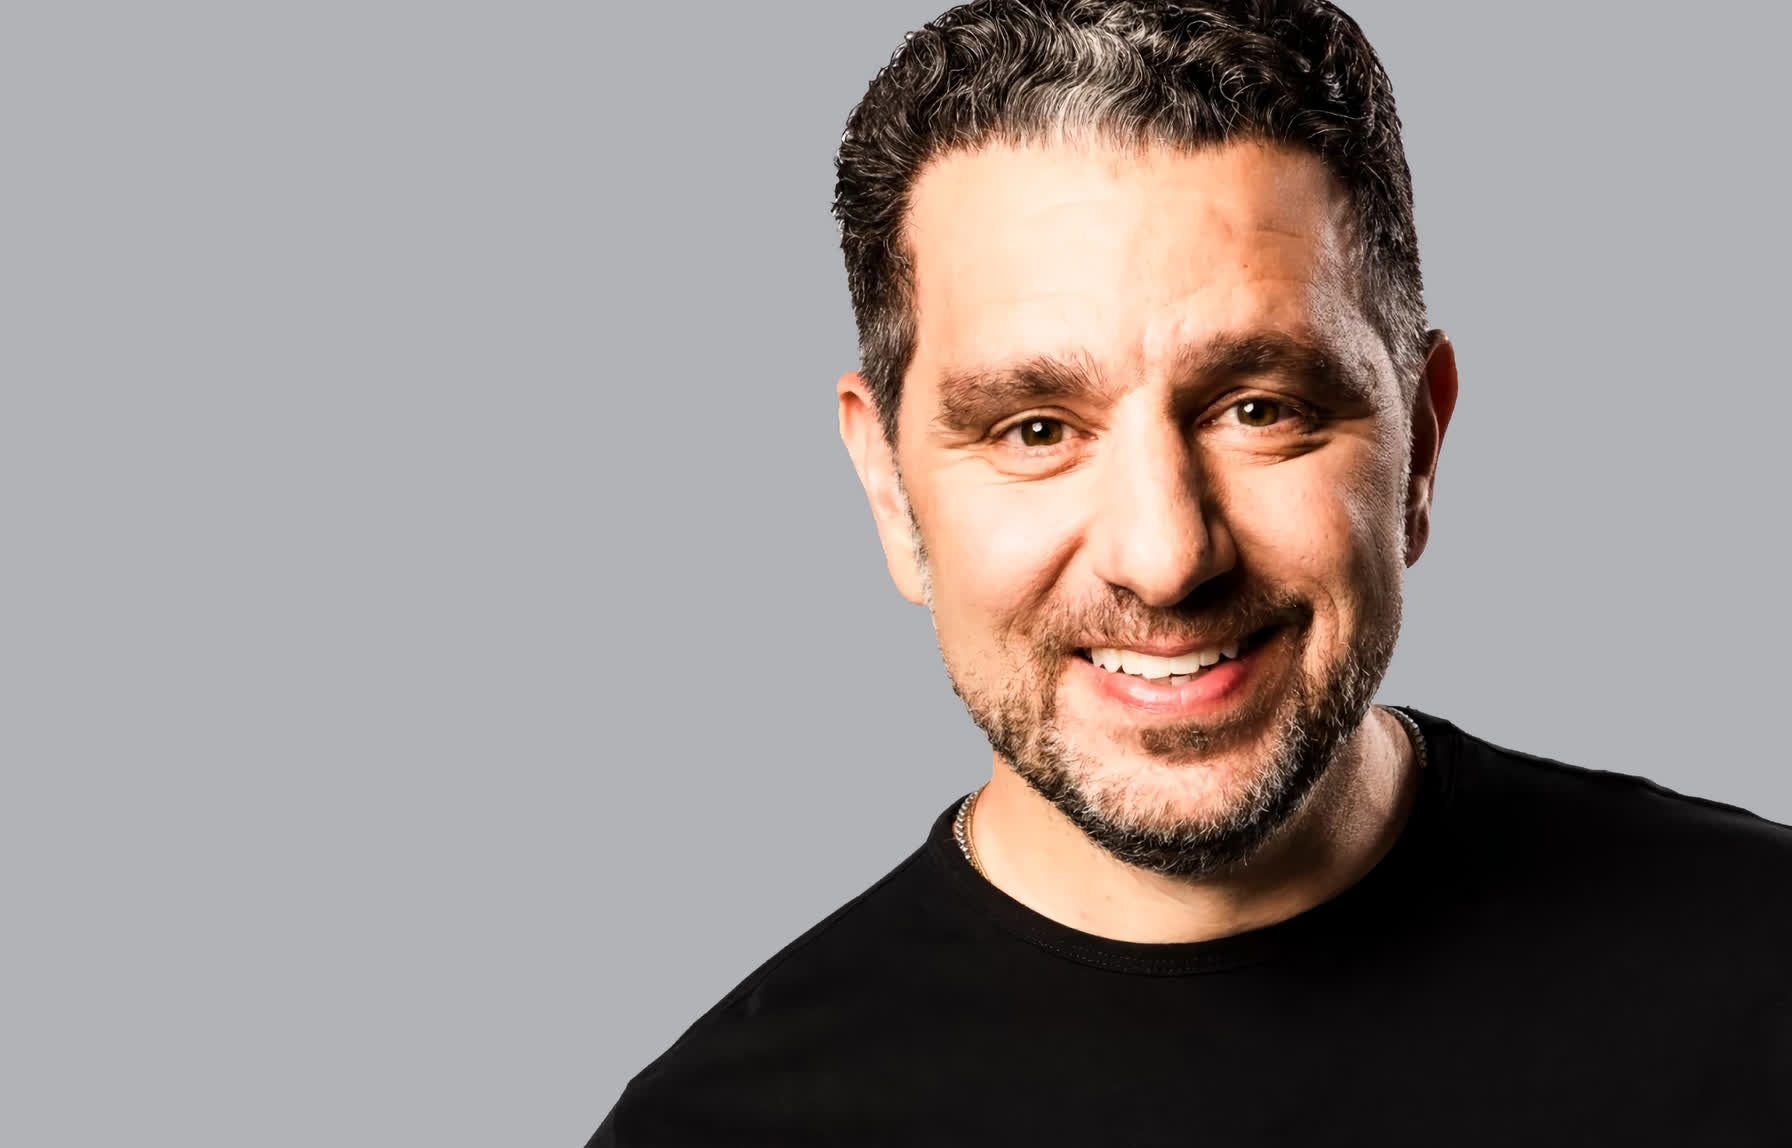 Microsoft vet Panos Panay is heading to Amazon to lead its devices and services business